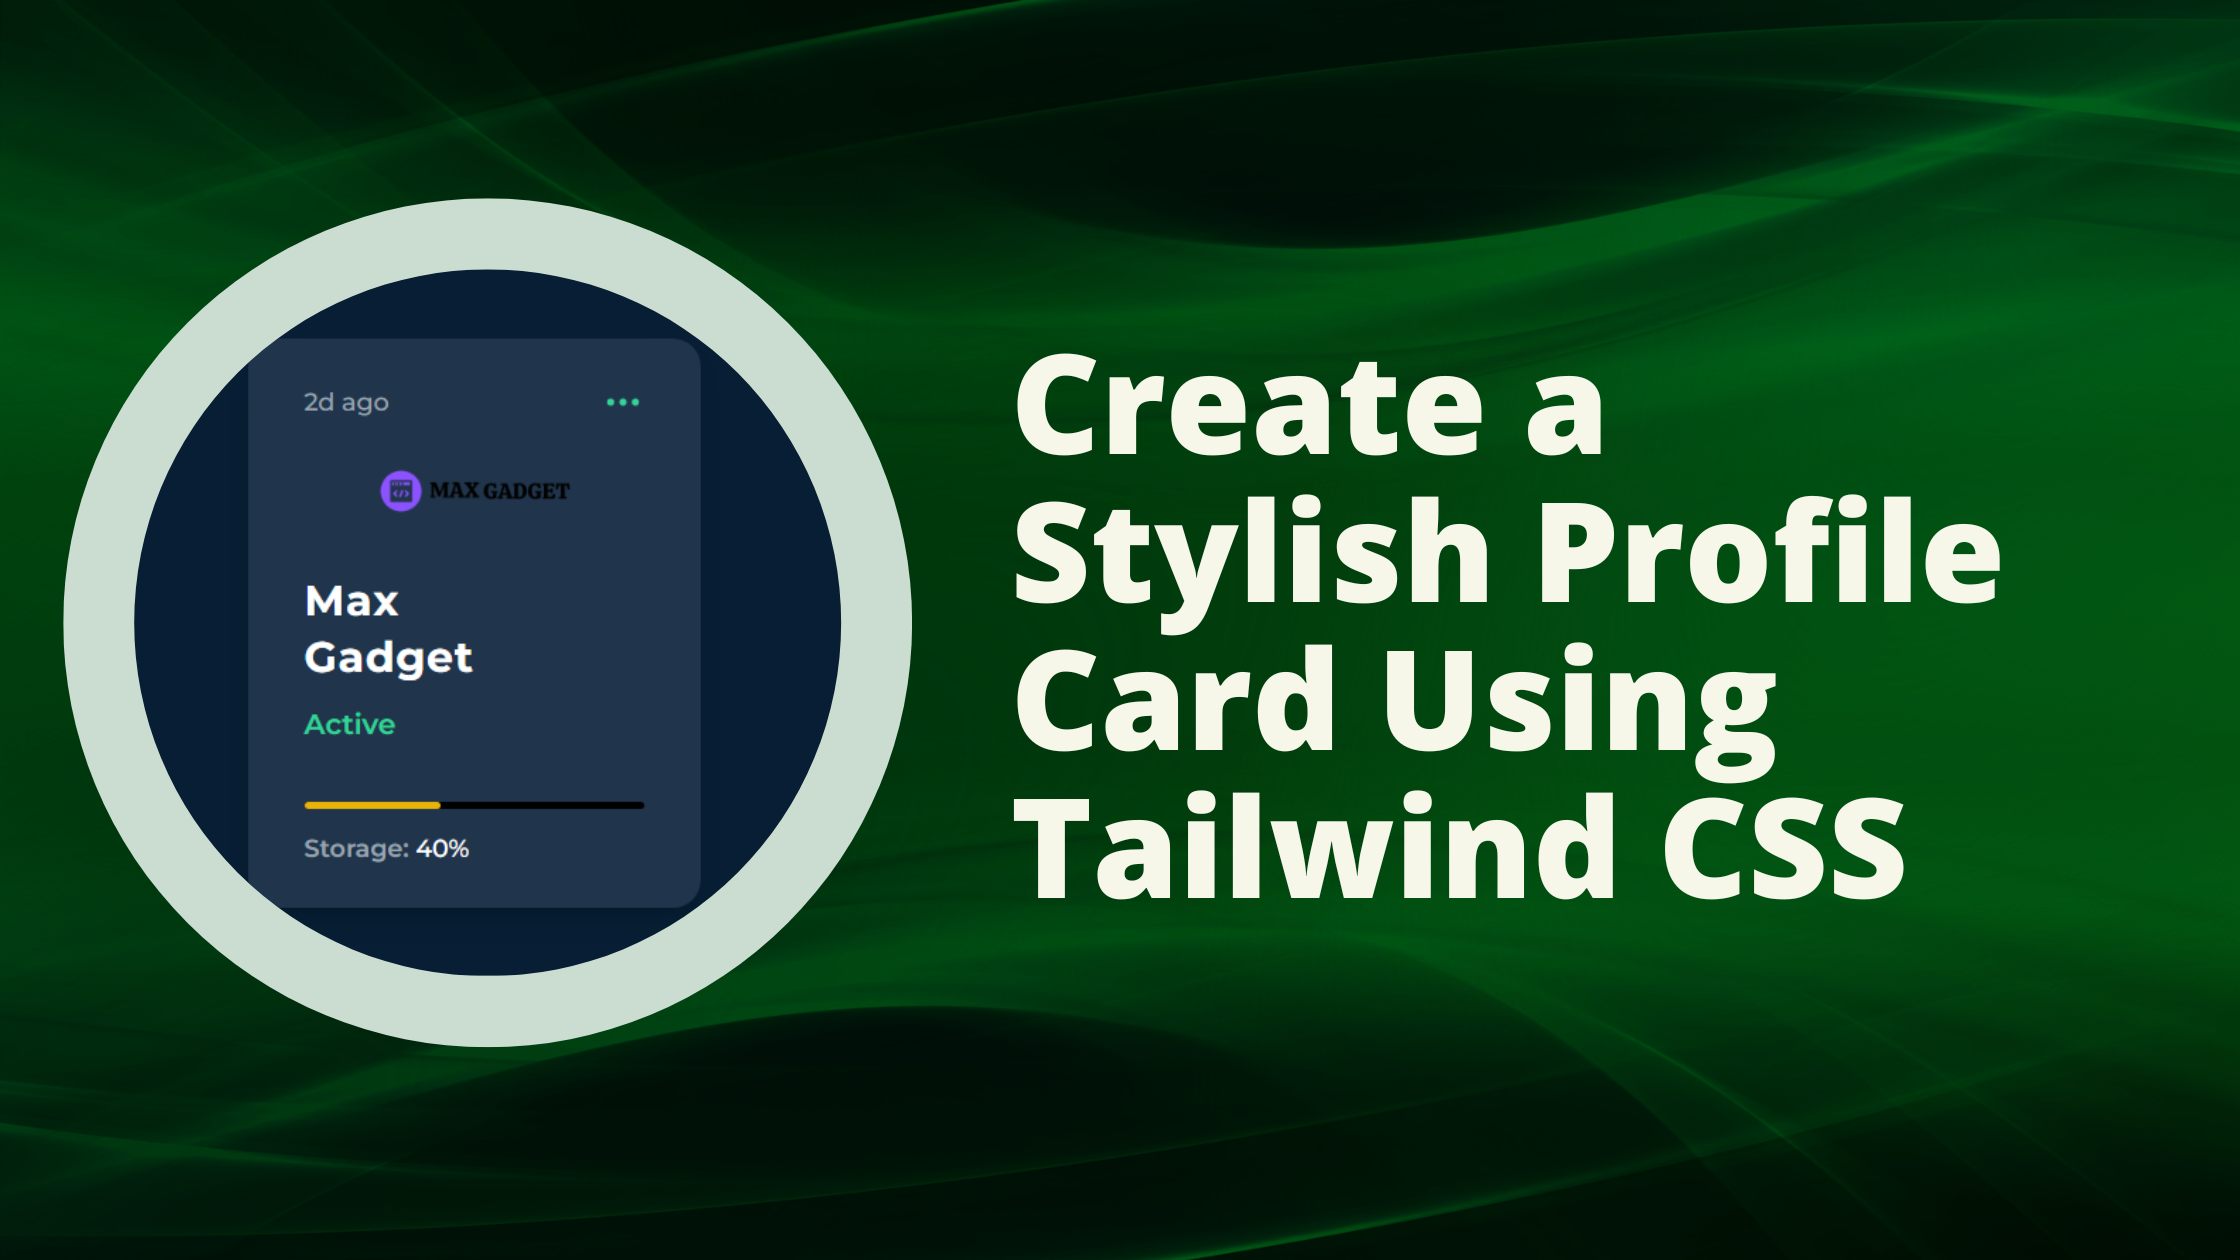 How To Create a Stylish Profile Card Using Tailwind CSS